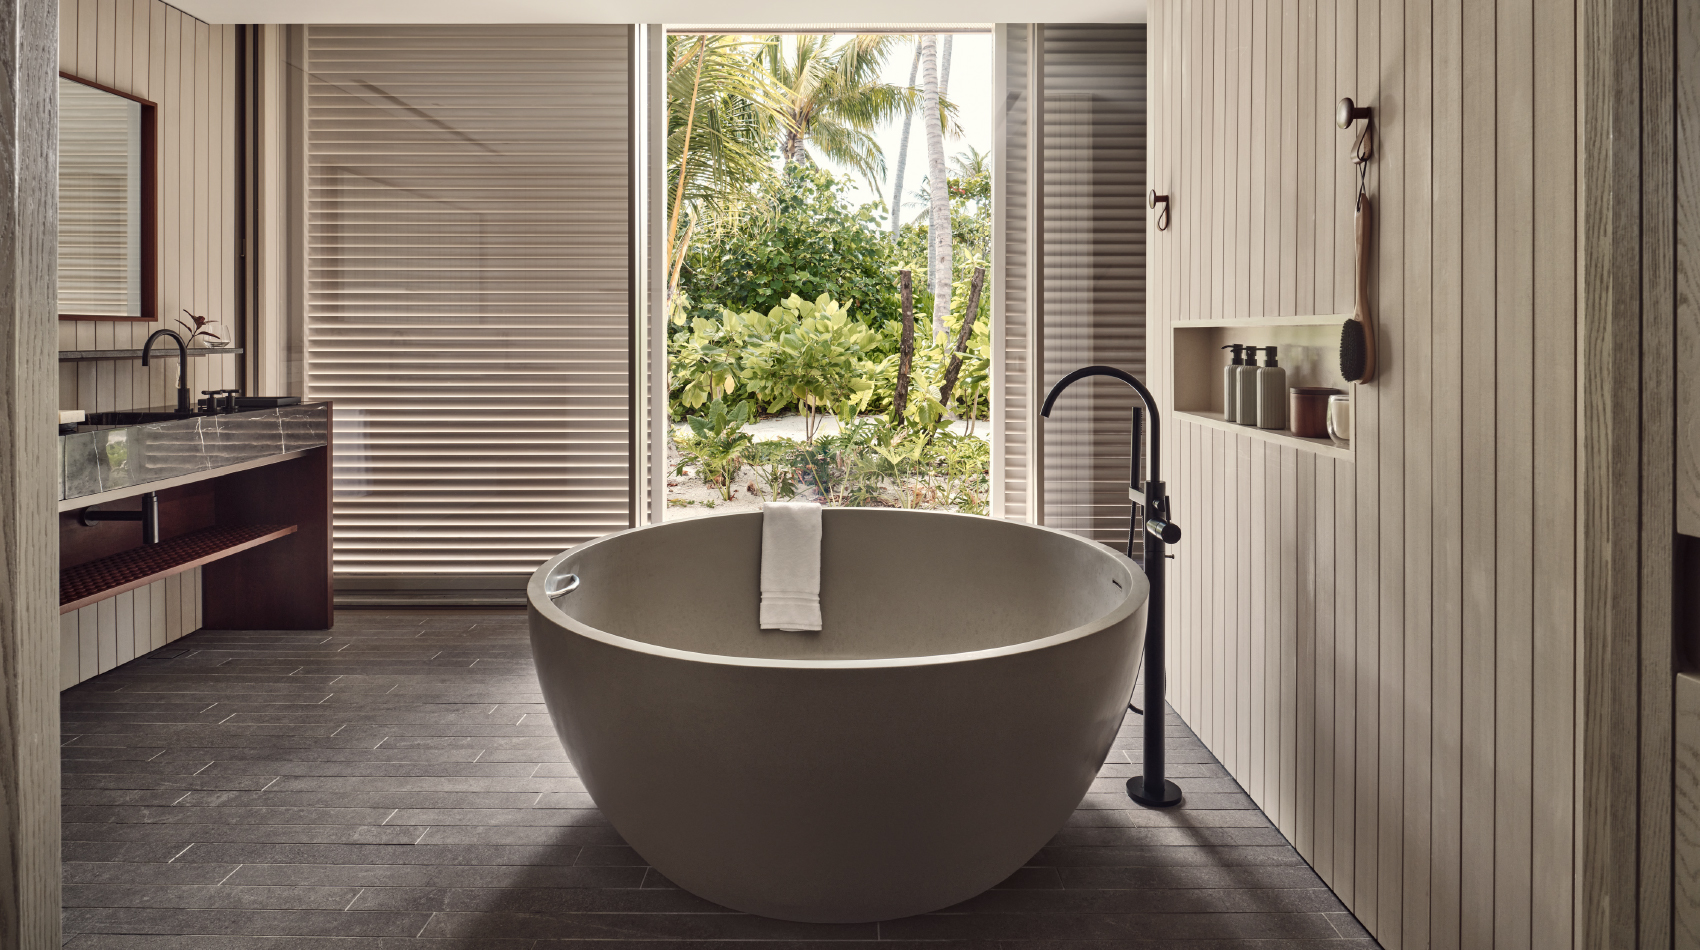 Luxury bathroom fittings available at Patina Maldives